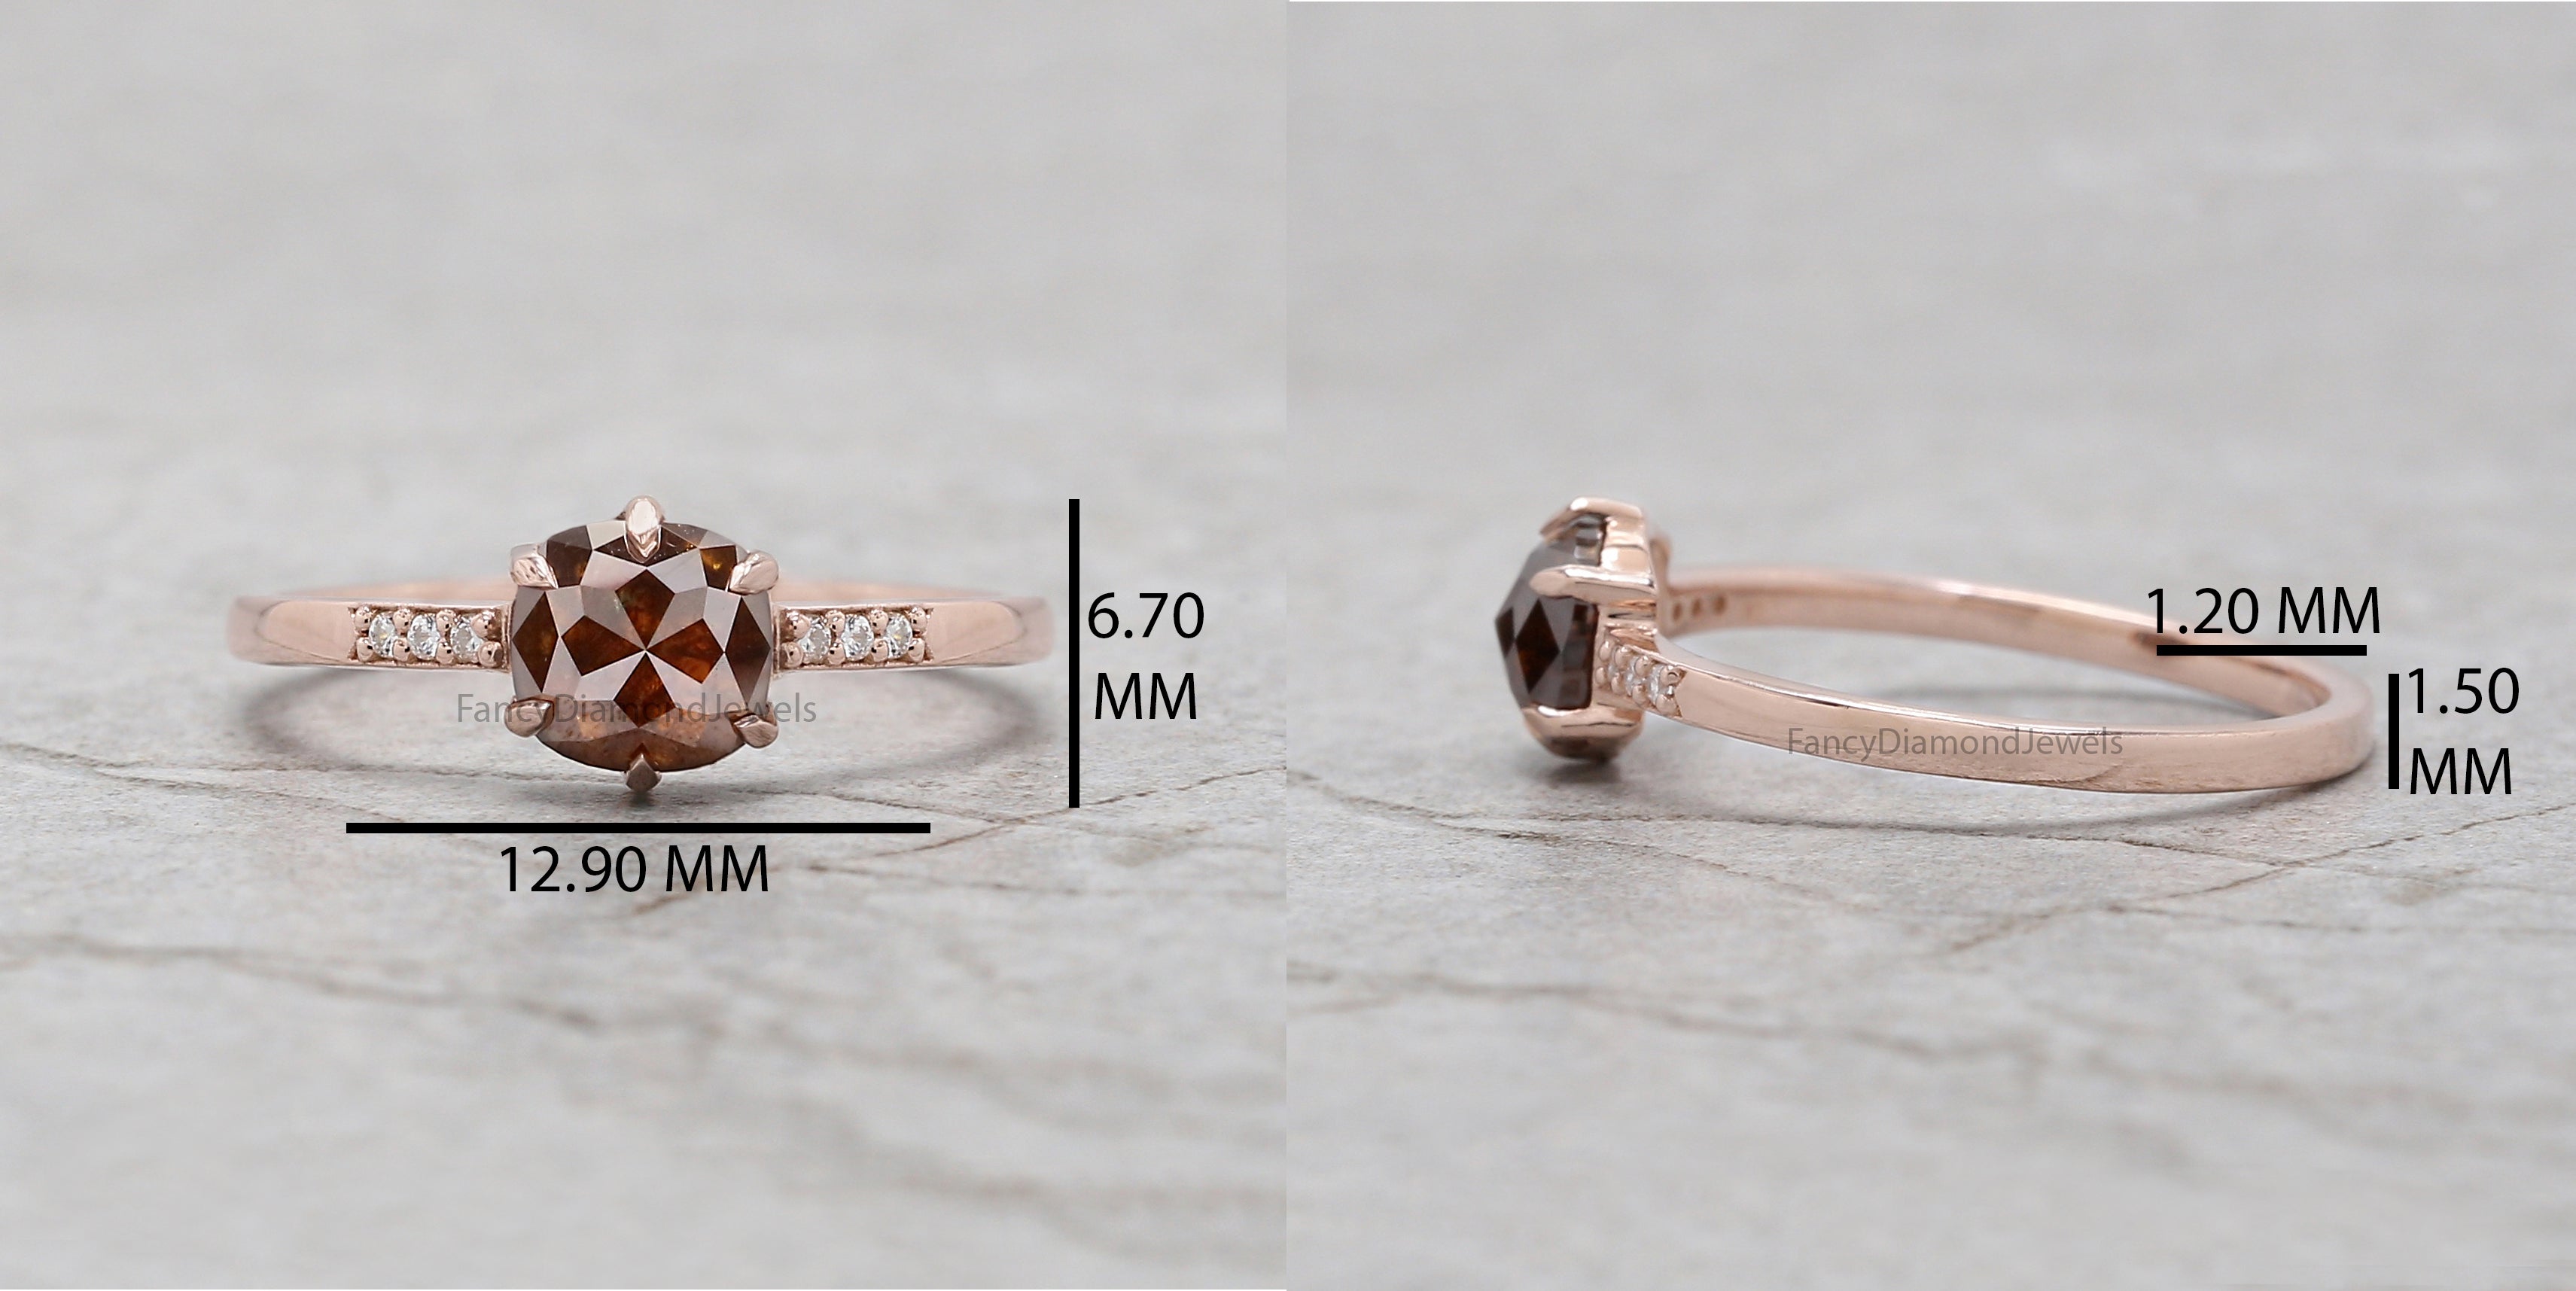 Cushion Shape Brown Color Diamond Ring 1.01 Ct 5.73 MM Cushion Diamond Ring 14K Solid Rose Gold Silver Engagement Ring Gift For Her QL2888